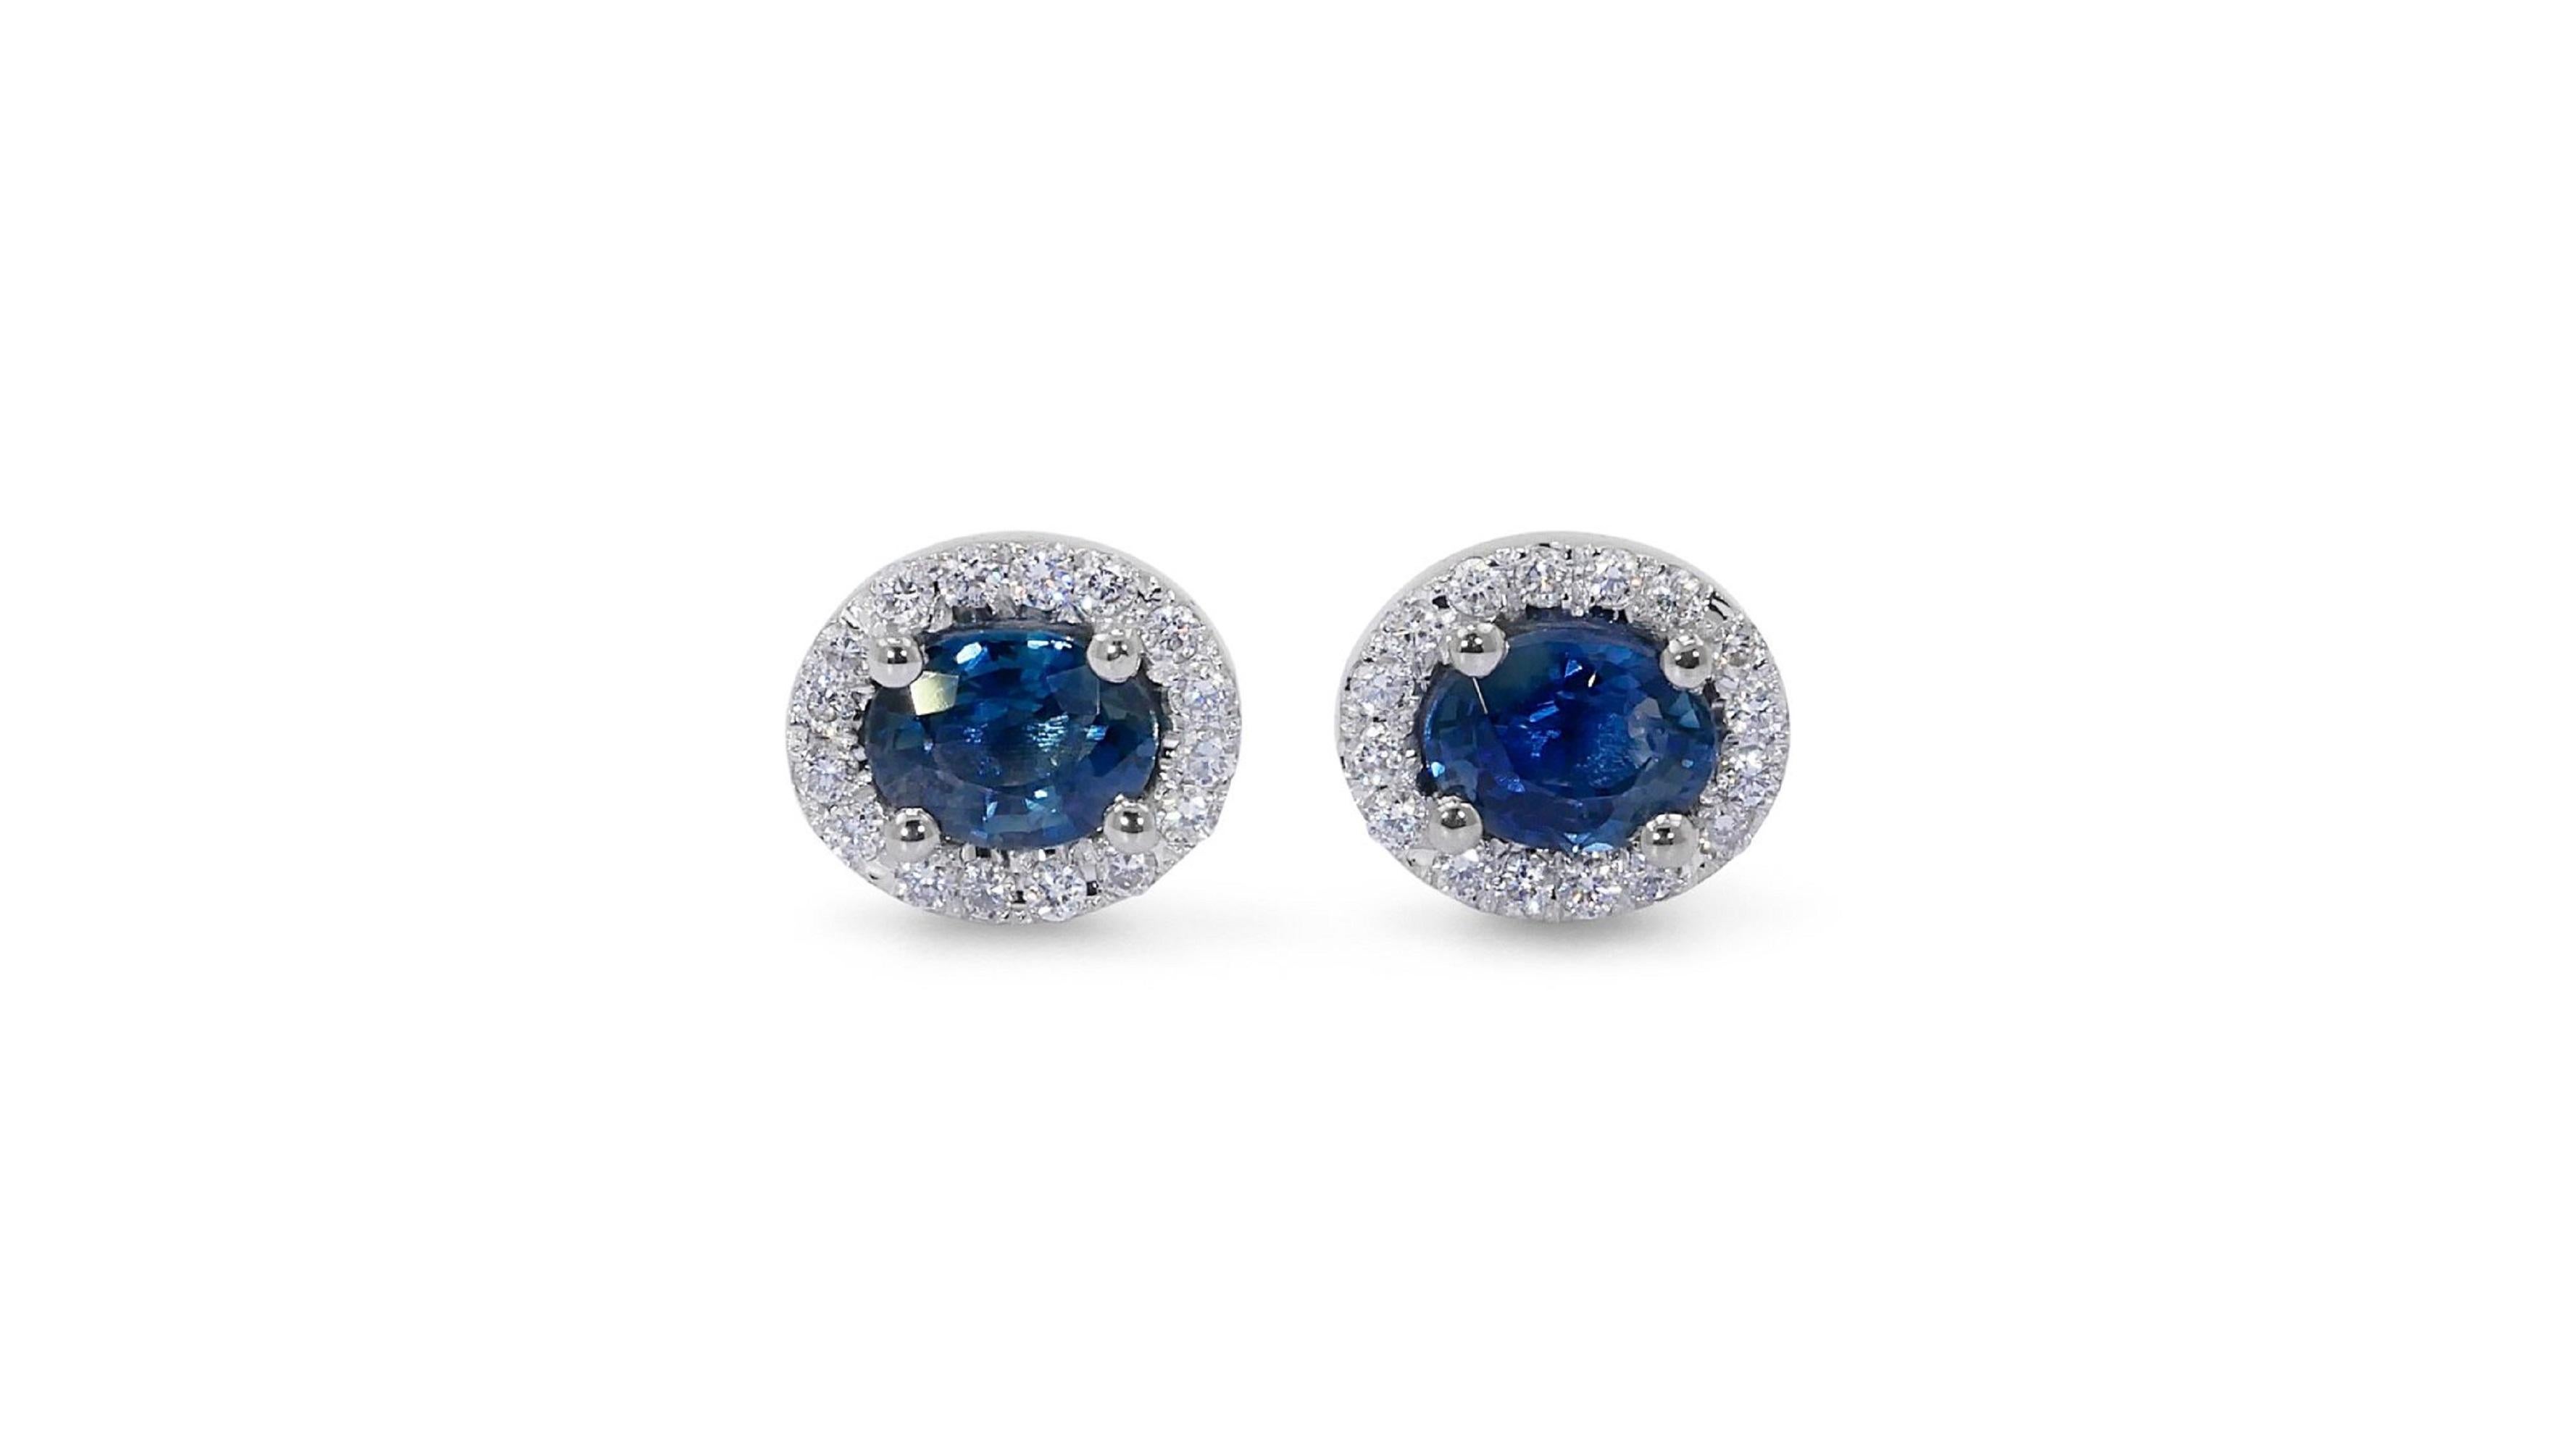 A beautiful pair of halo stud earrings with a dazzling pair of 0.70 carat oval sapphires. These earrings have 0.15 carat of side diamonds, which add to their elegance. The jewelry is made of 18K white gold with a high quality polish. It comes with